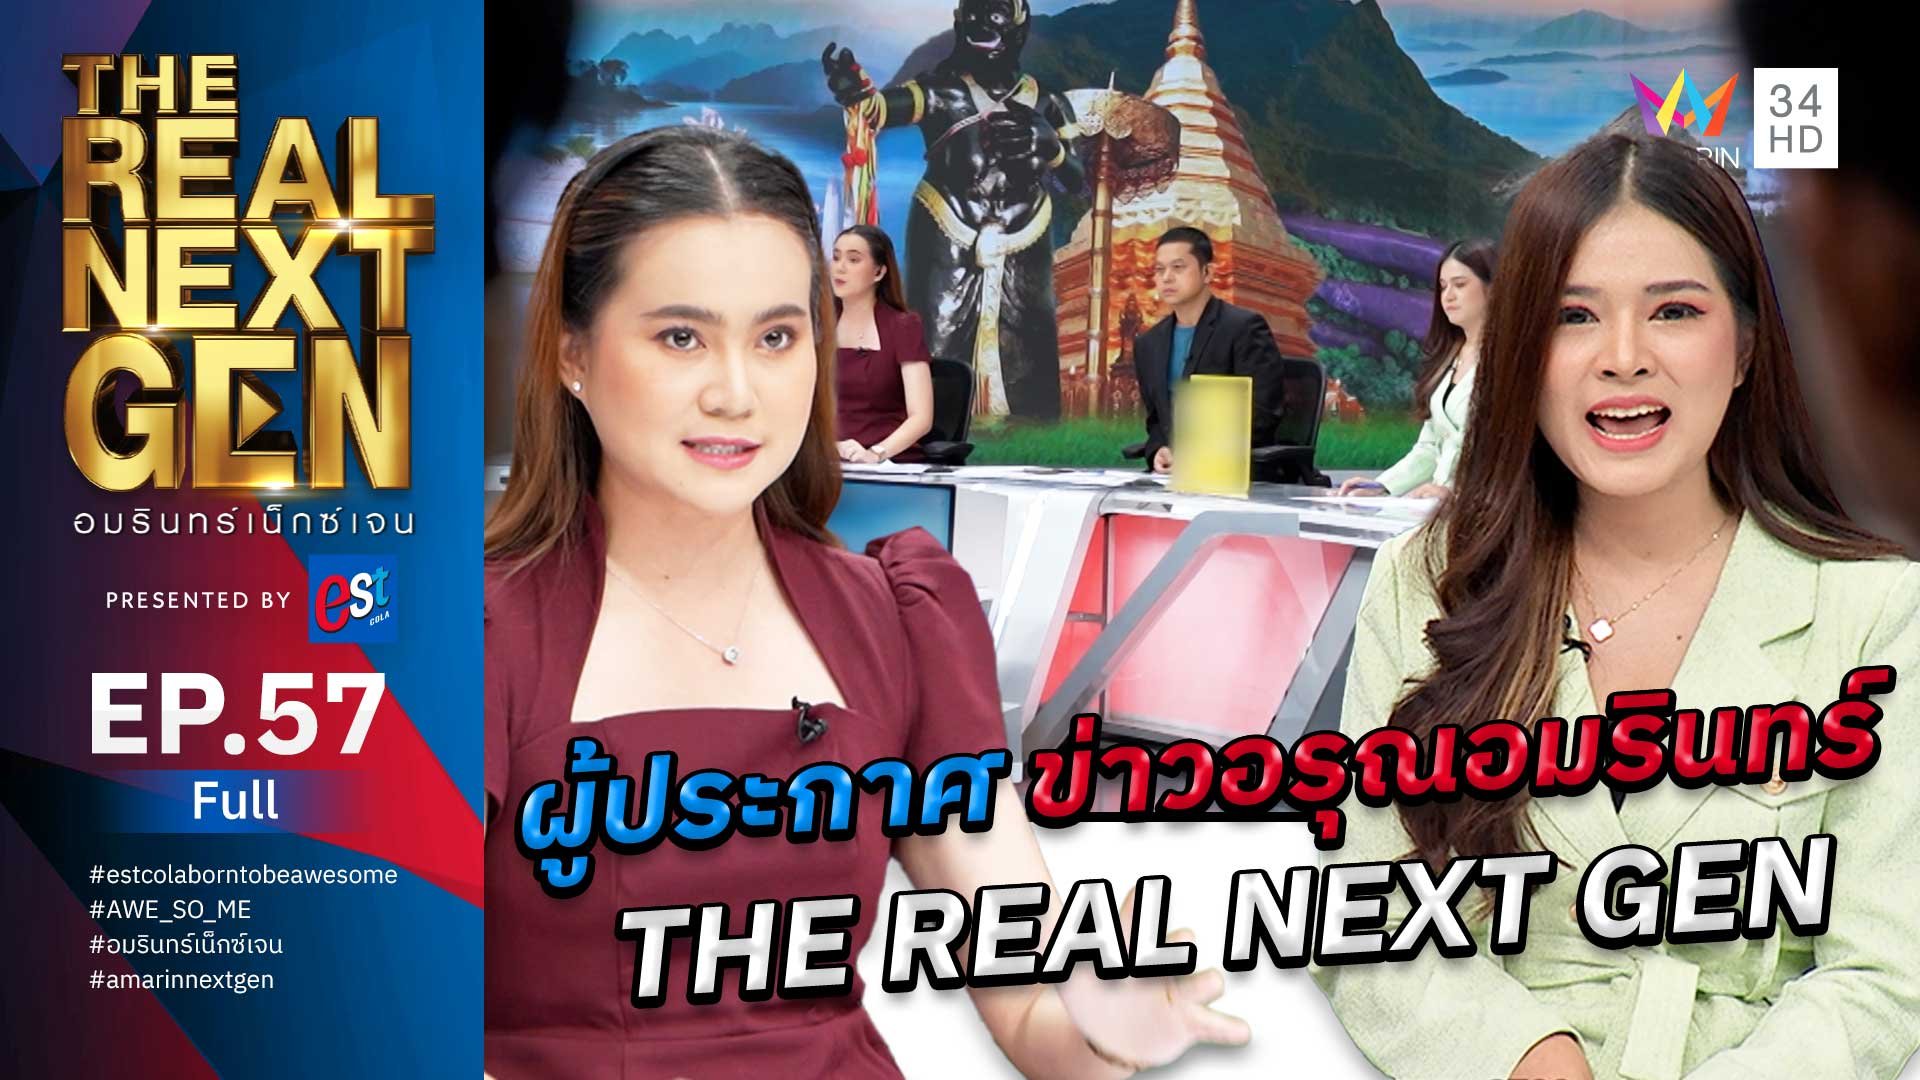 The Real Next Gen อมรินทร์เน็กซ์เจน | EP.57 THE REAL NEXT GEN อมรินทร์เน็กซ์เจน Presented By est cola  | 5 ธ.ค. 66 | AMARIN TVHD34